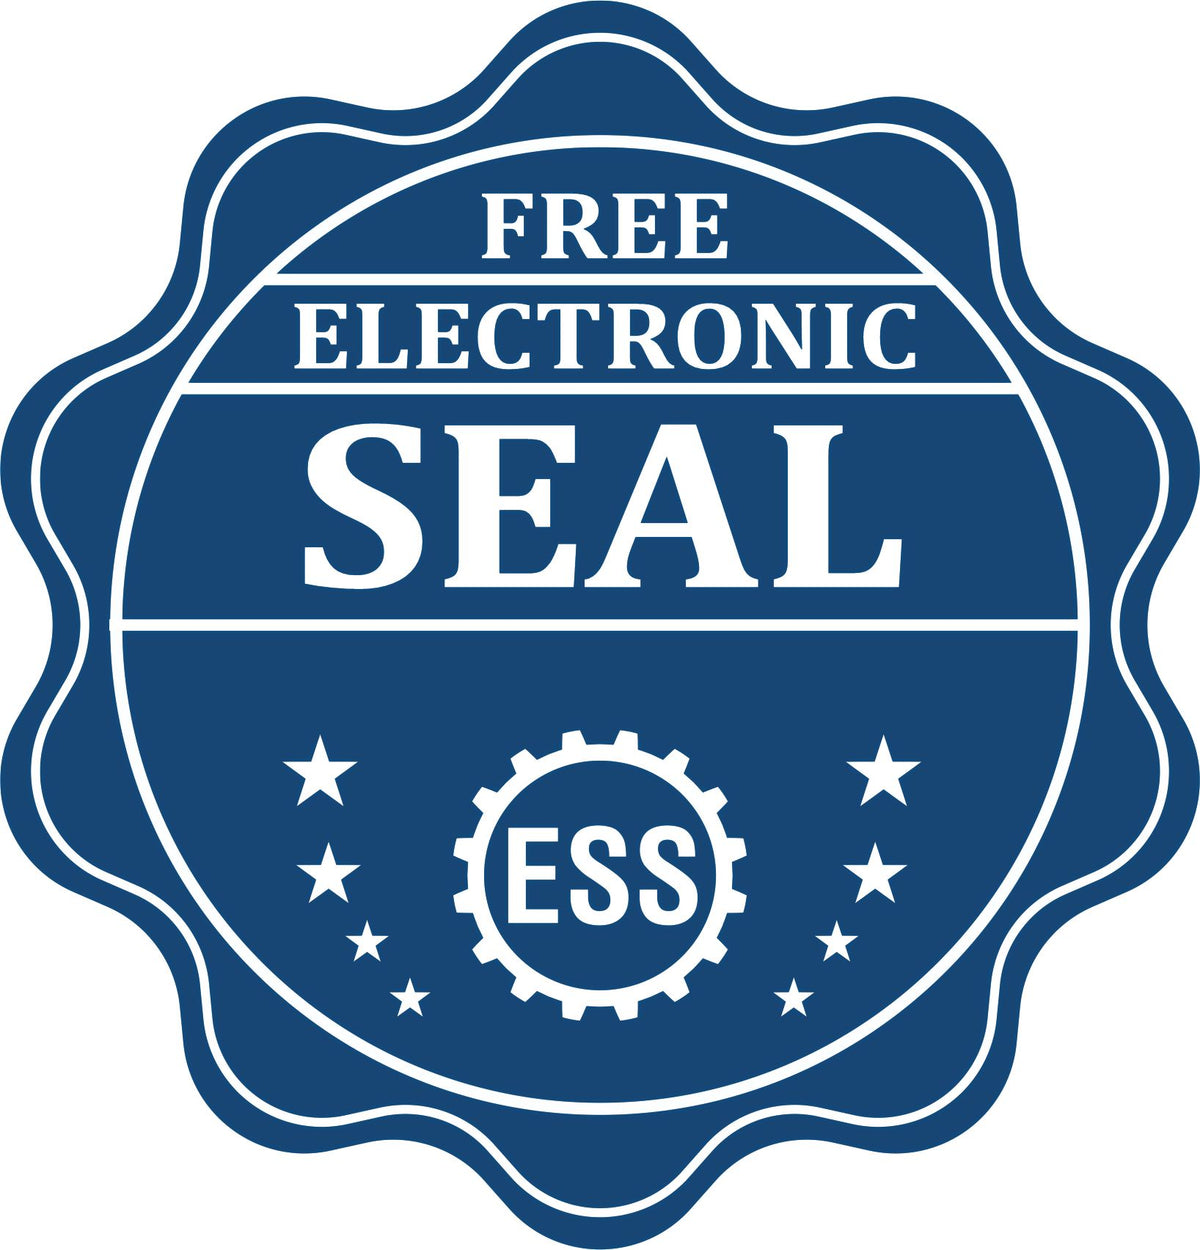 A badge showing a free electronic seal for the Hybrid Michigan Engineer Seal with stars and the ESS gear on the emblem.